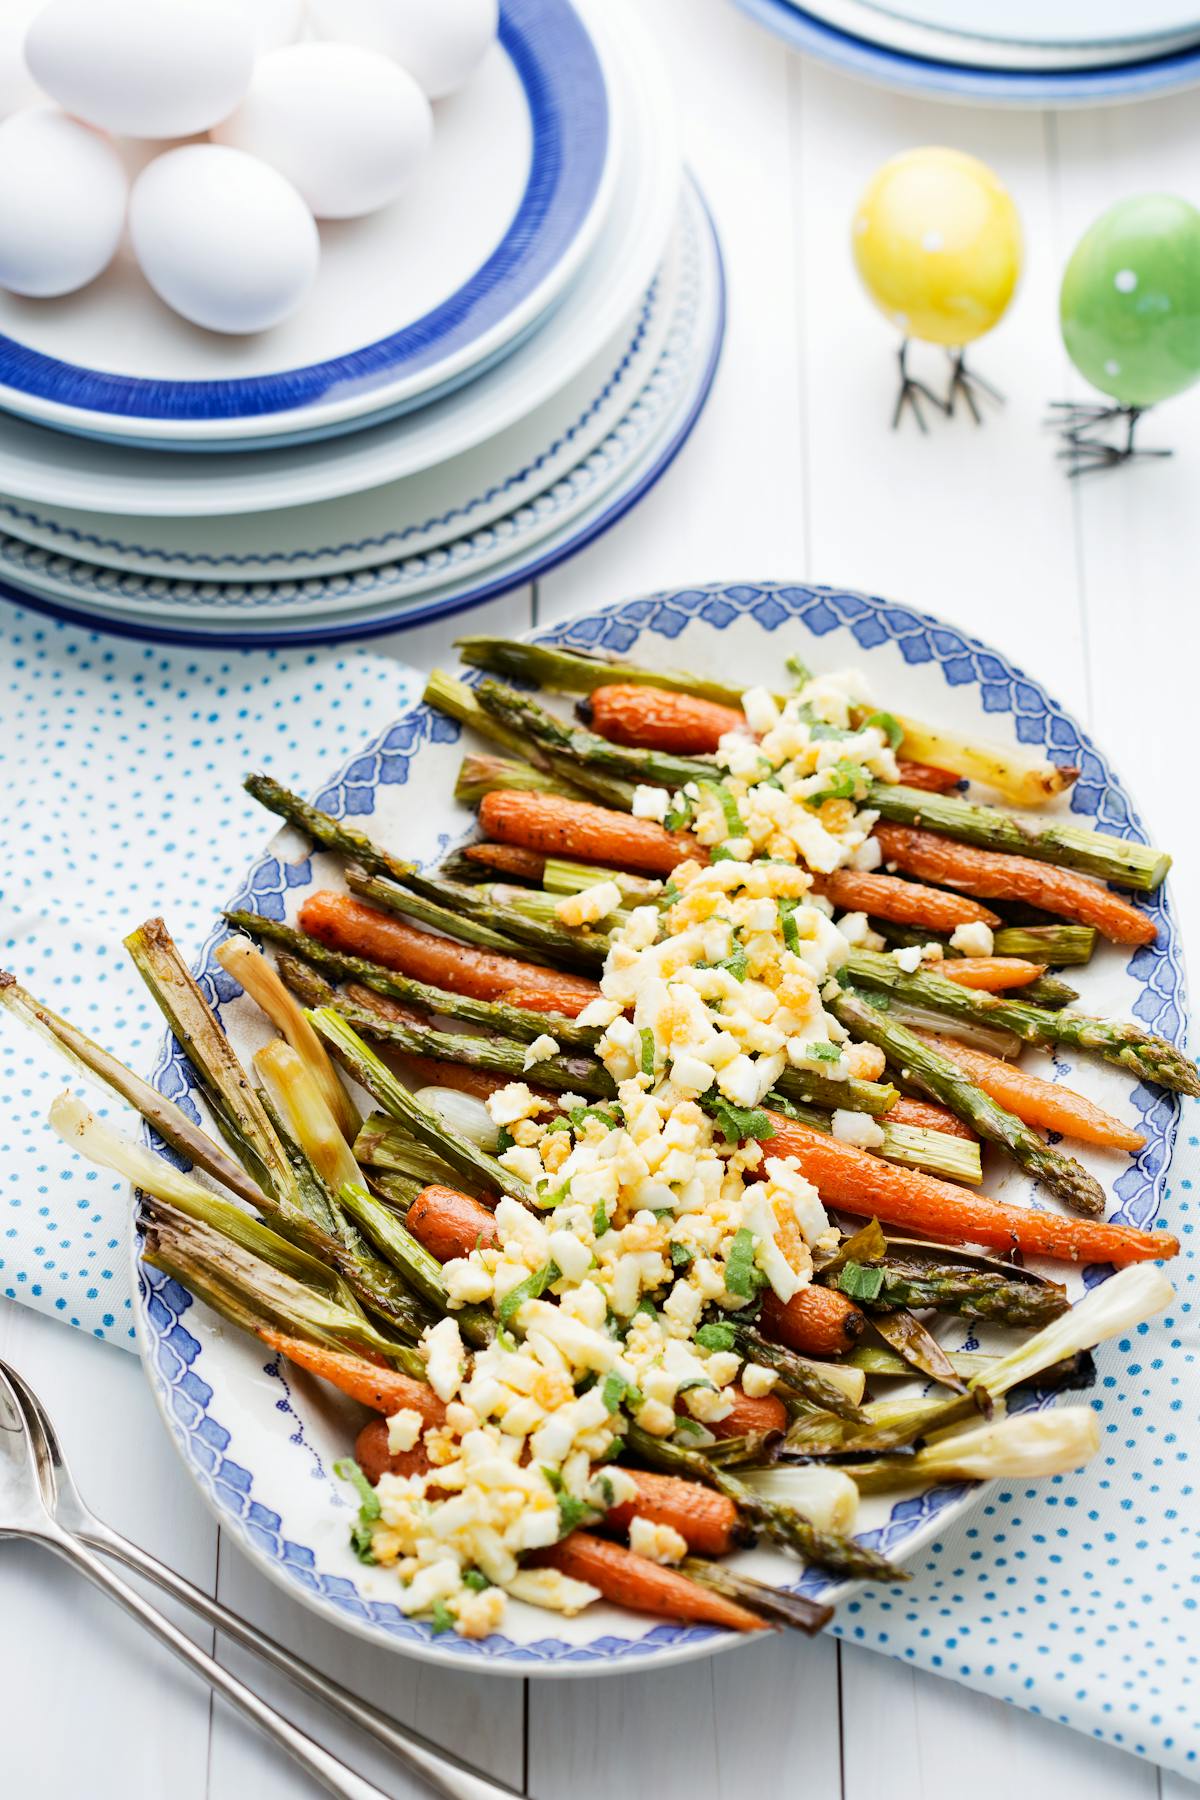 Roasted spring vegetables with eggs and browned butter